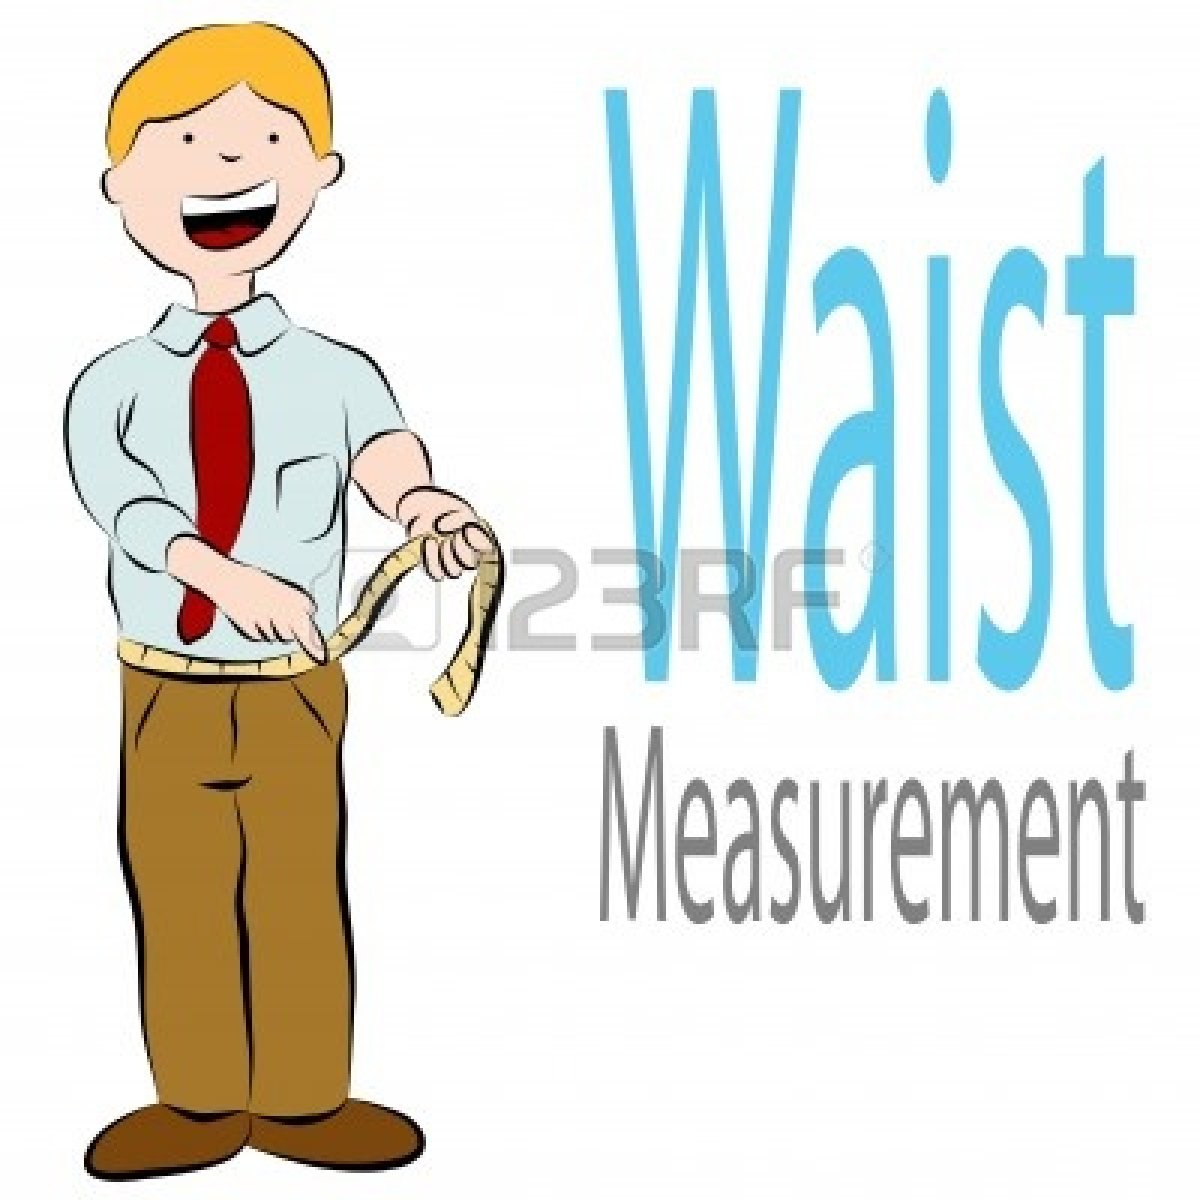 Waist Clipart 9552316 An Image Of A Man Measuring His Waist With A